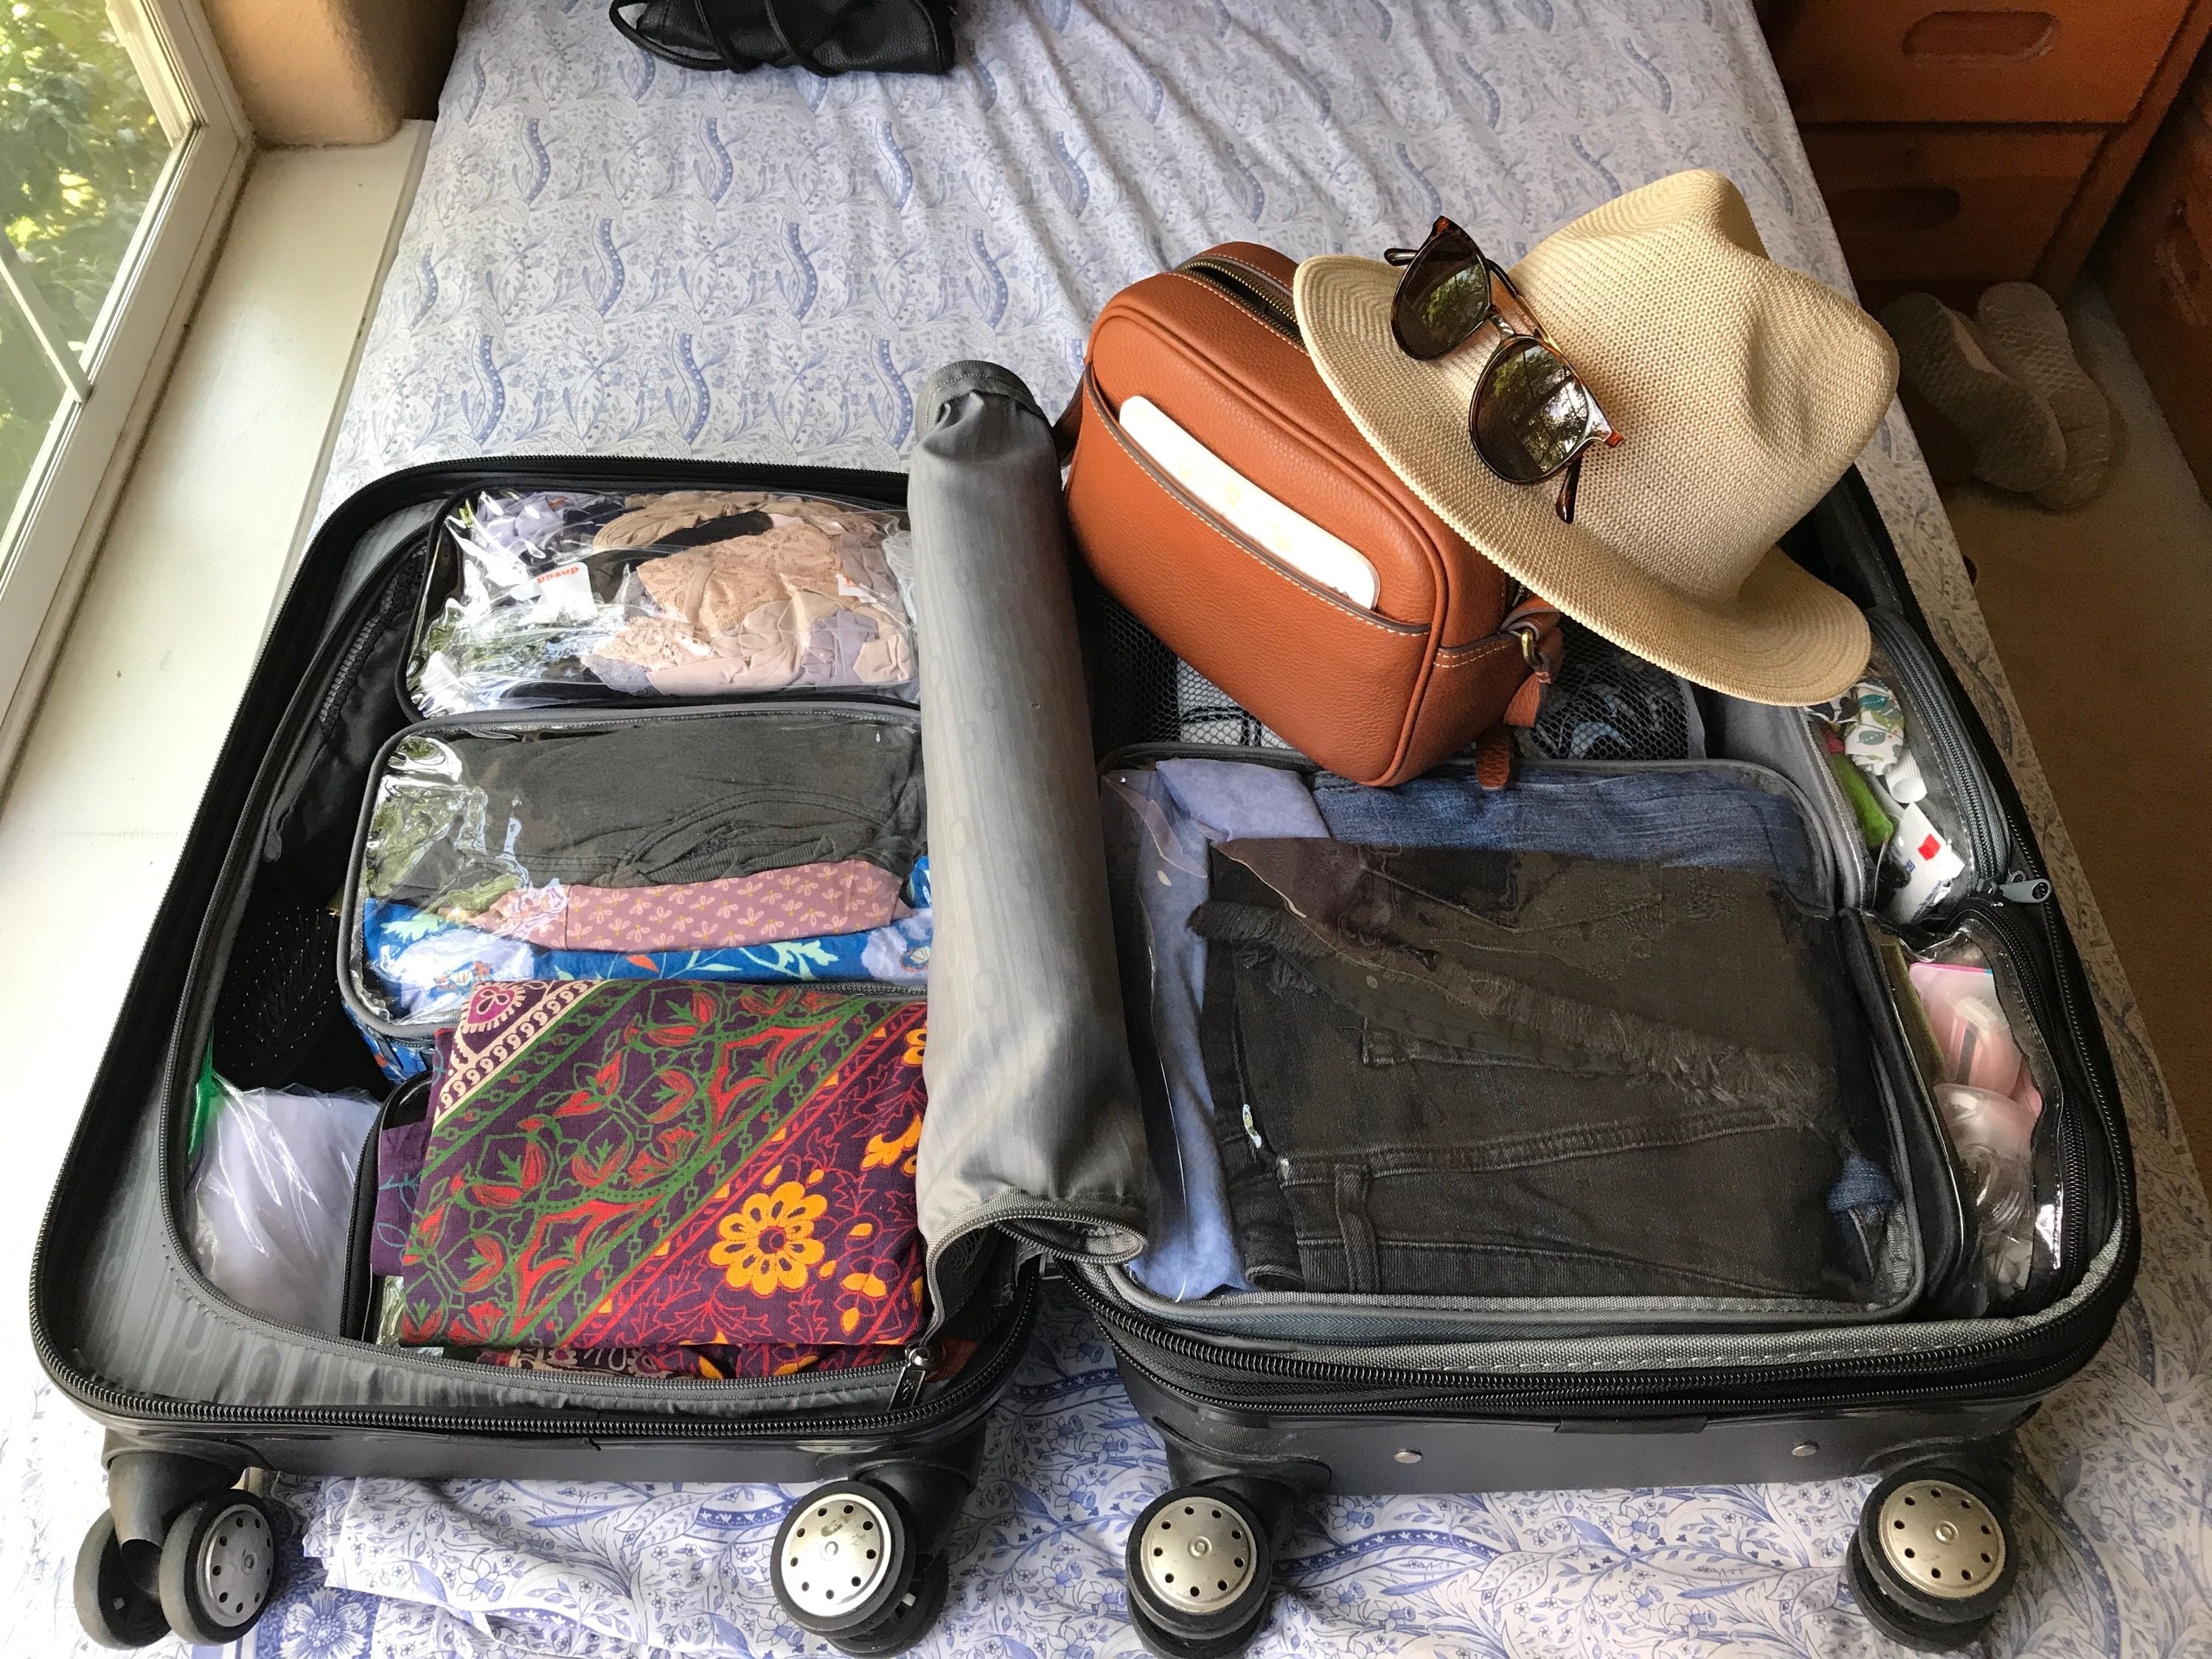 Organized essentials in a suitcase using clear cubes